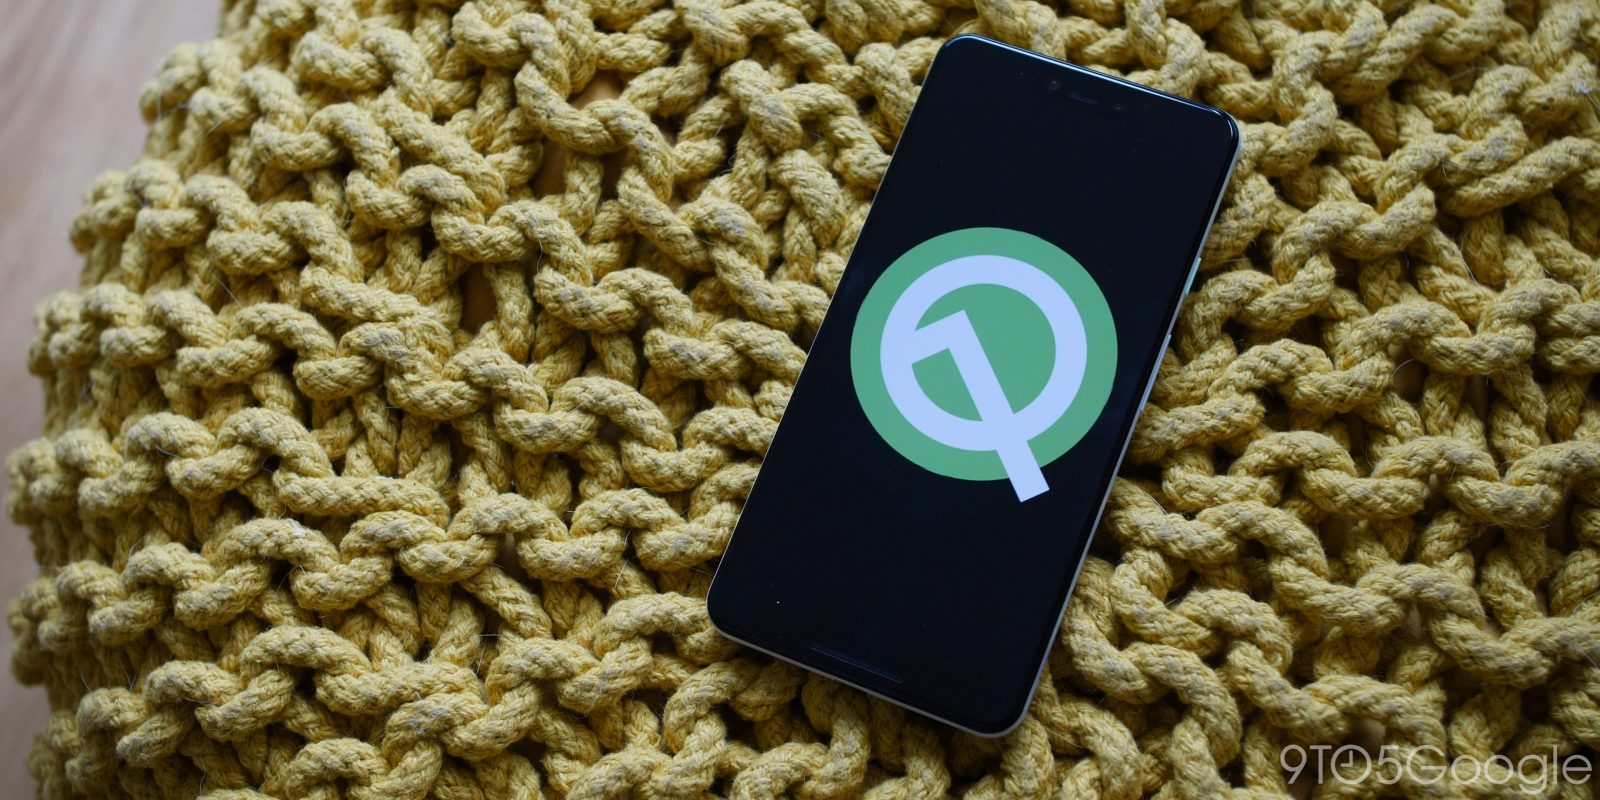 Android Q Beta 6 top new features